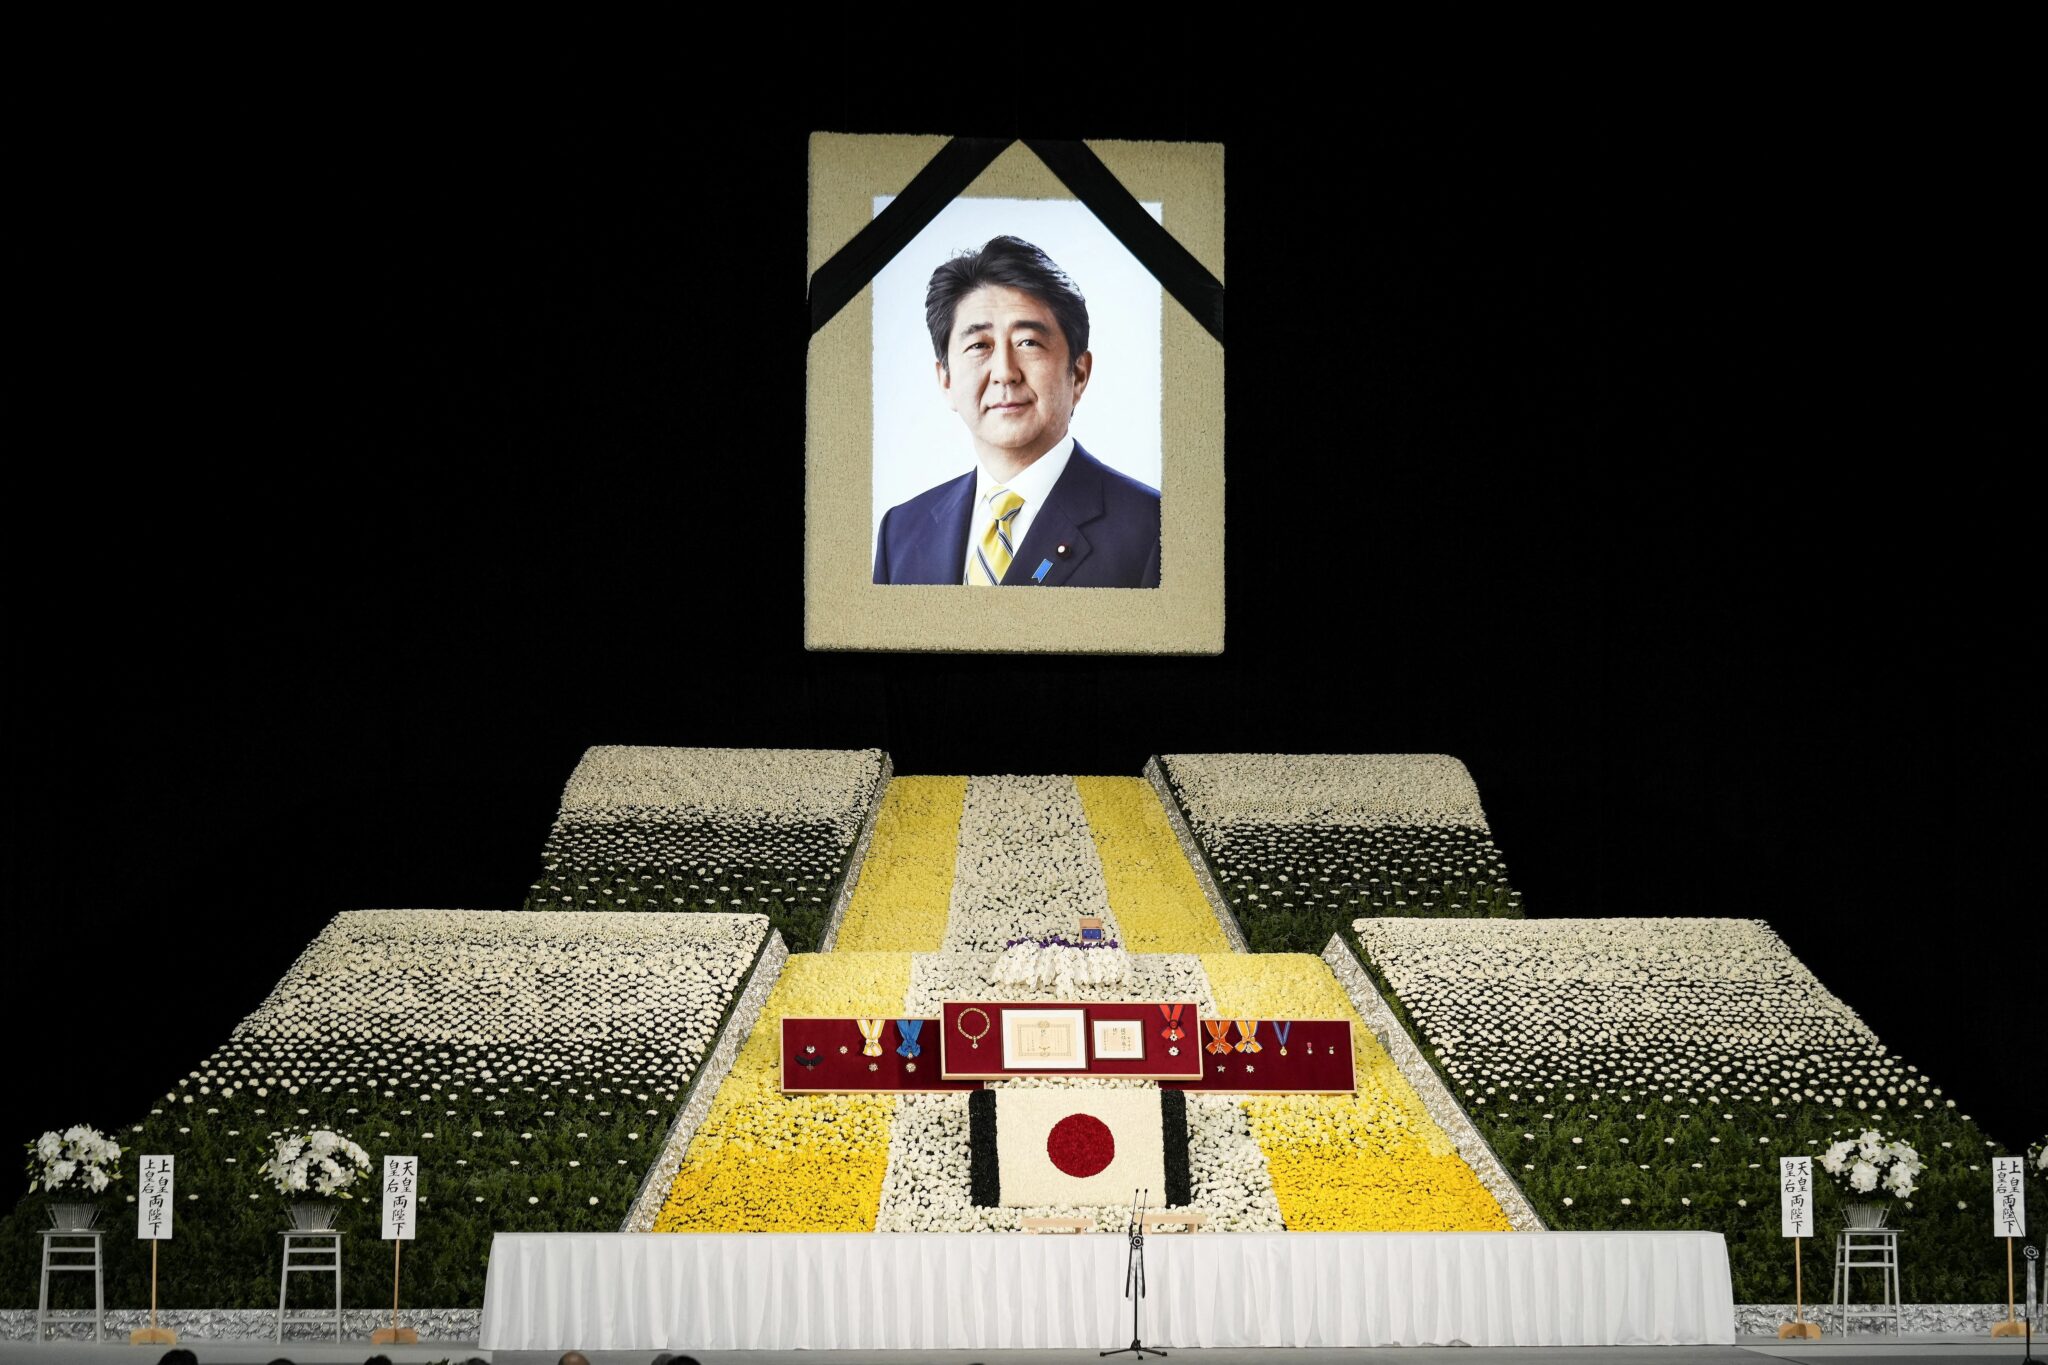 A photograph of Japan's former prime minister Shinzo Abe is displayed during his state funeral in the Nippon Budokan in Tokyo on September 27, 2022. (Photo by FRANCK ROBICHON / POOL / AFP) (Photo by FRANCK ROBICHON/POOL/AFP via Getty Images)